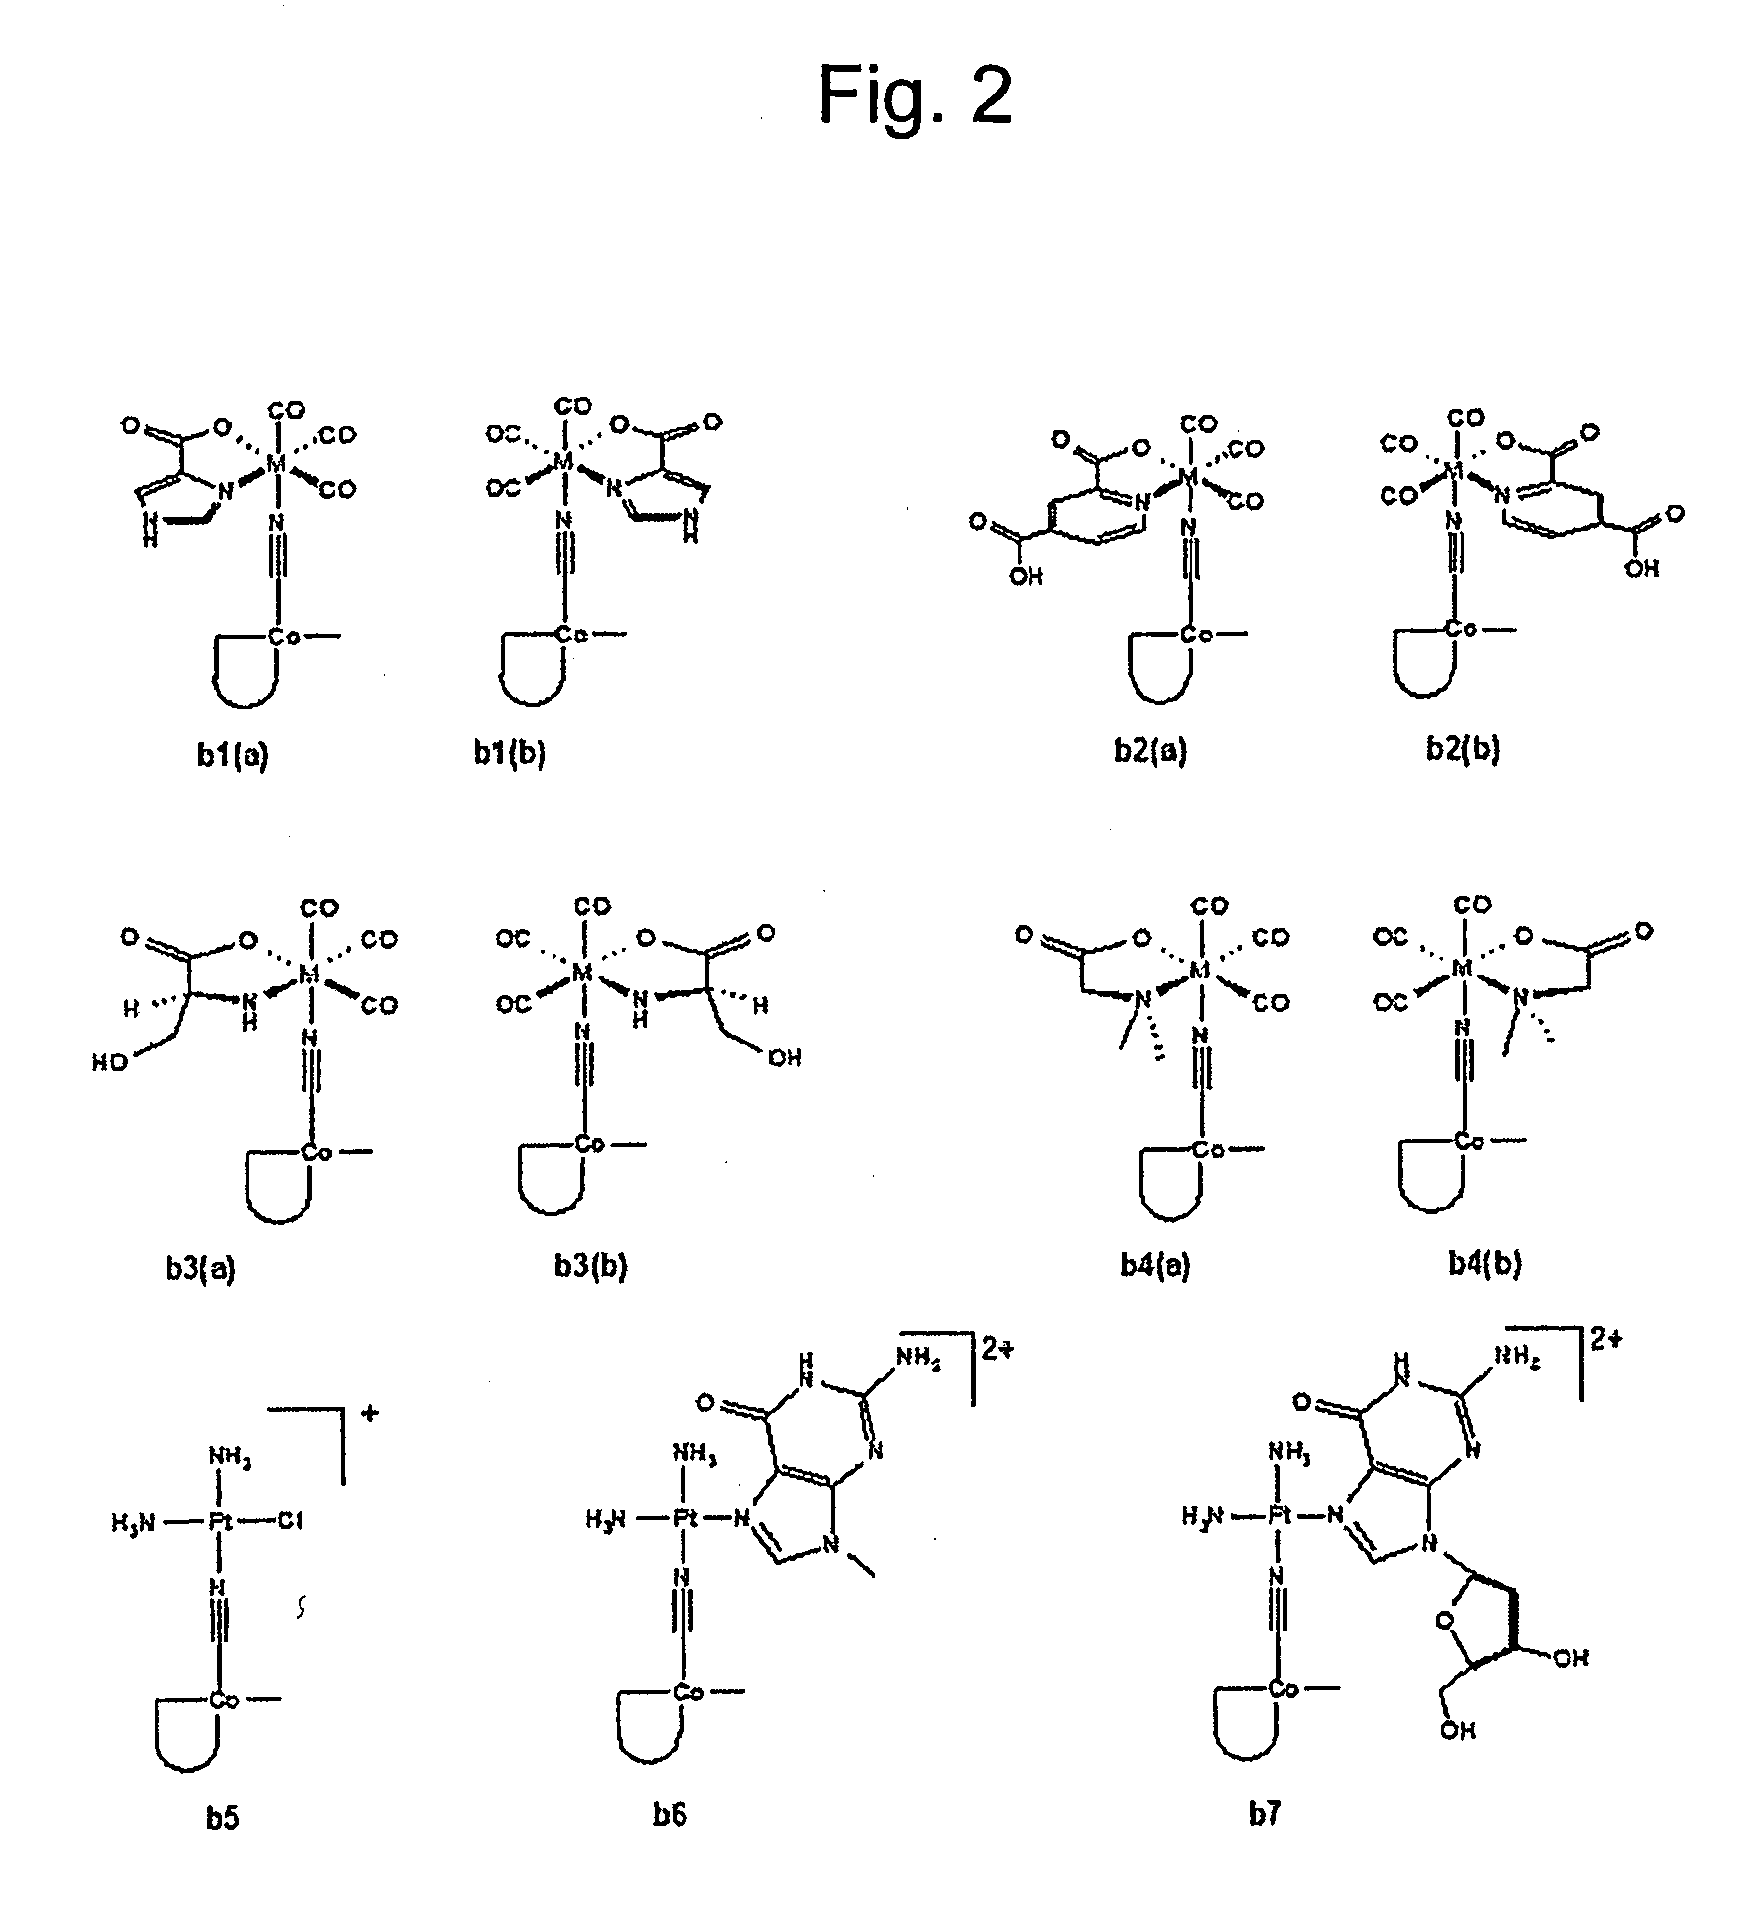 Metal complexes having vitamin b12 as a ligand